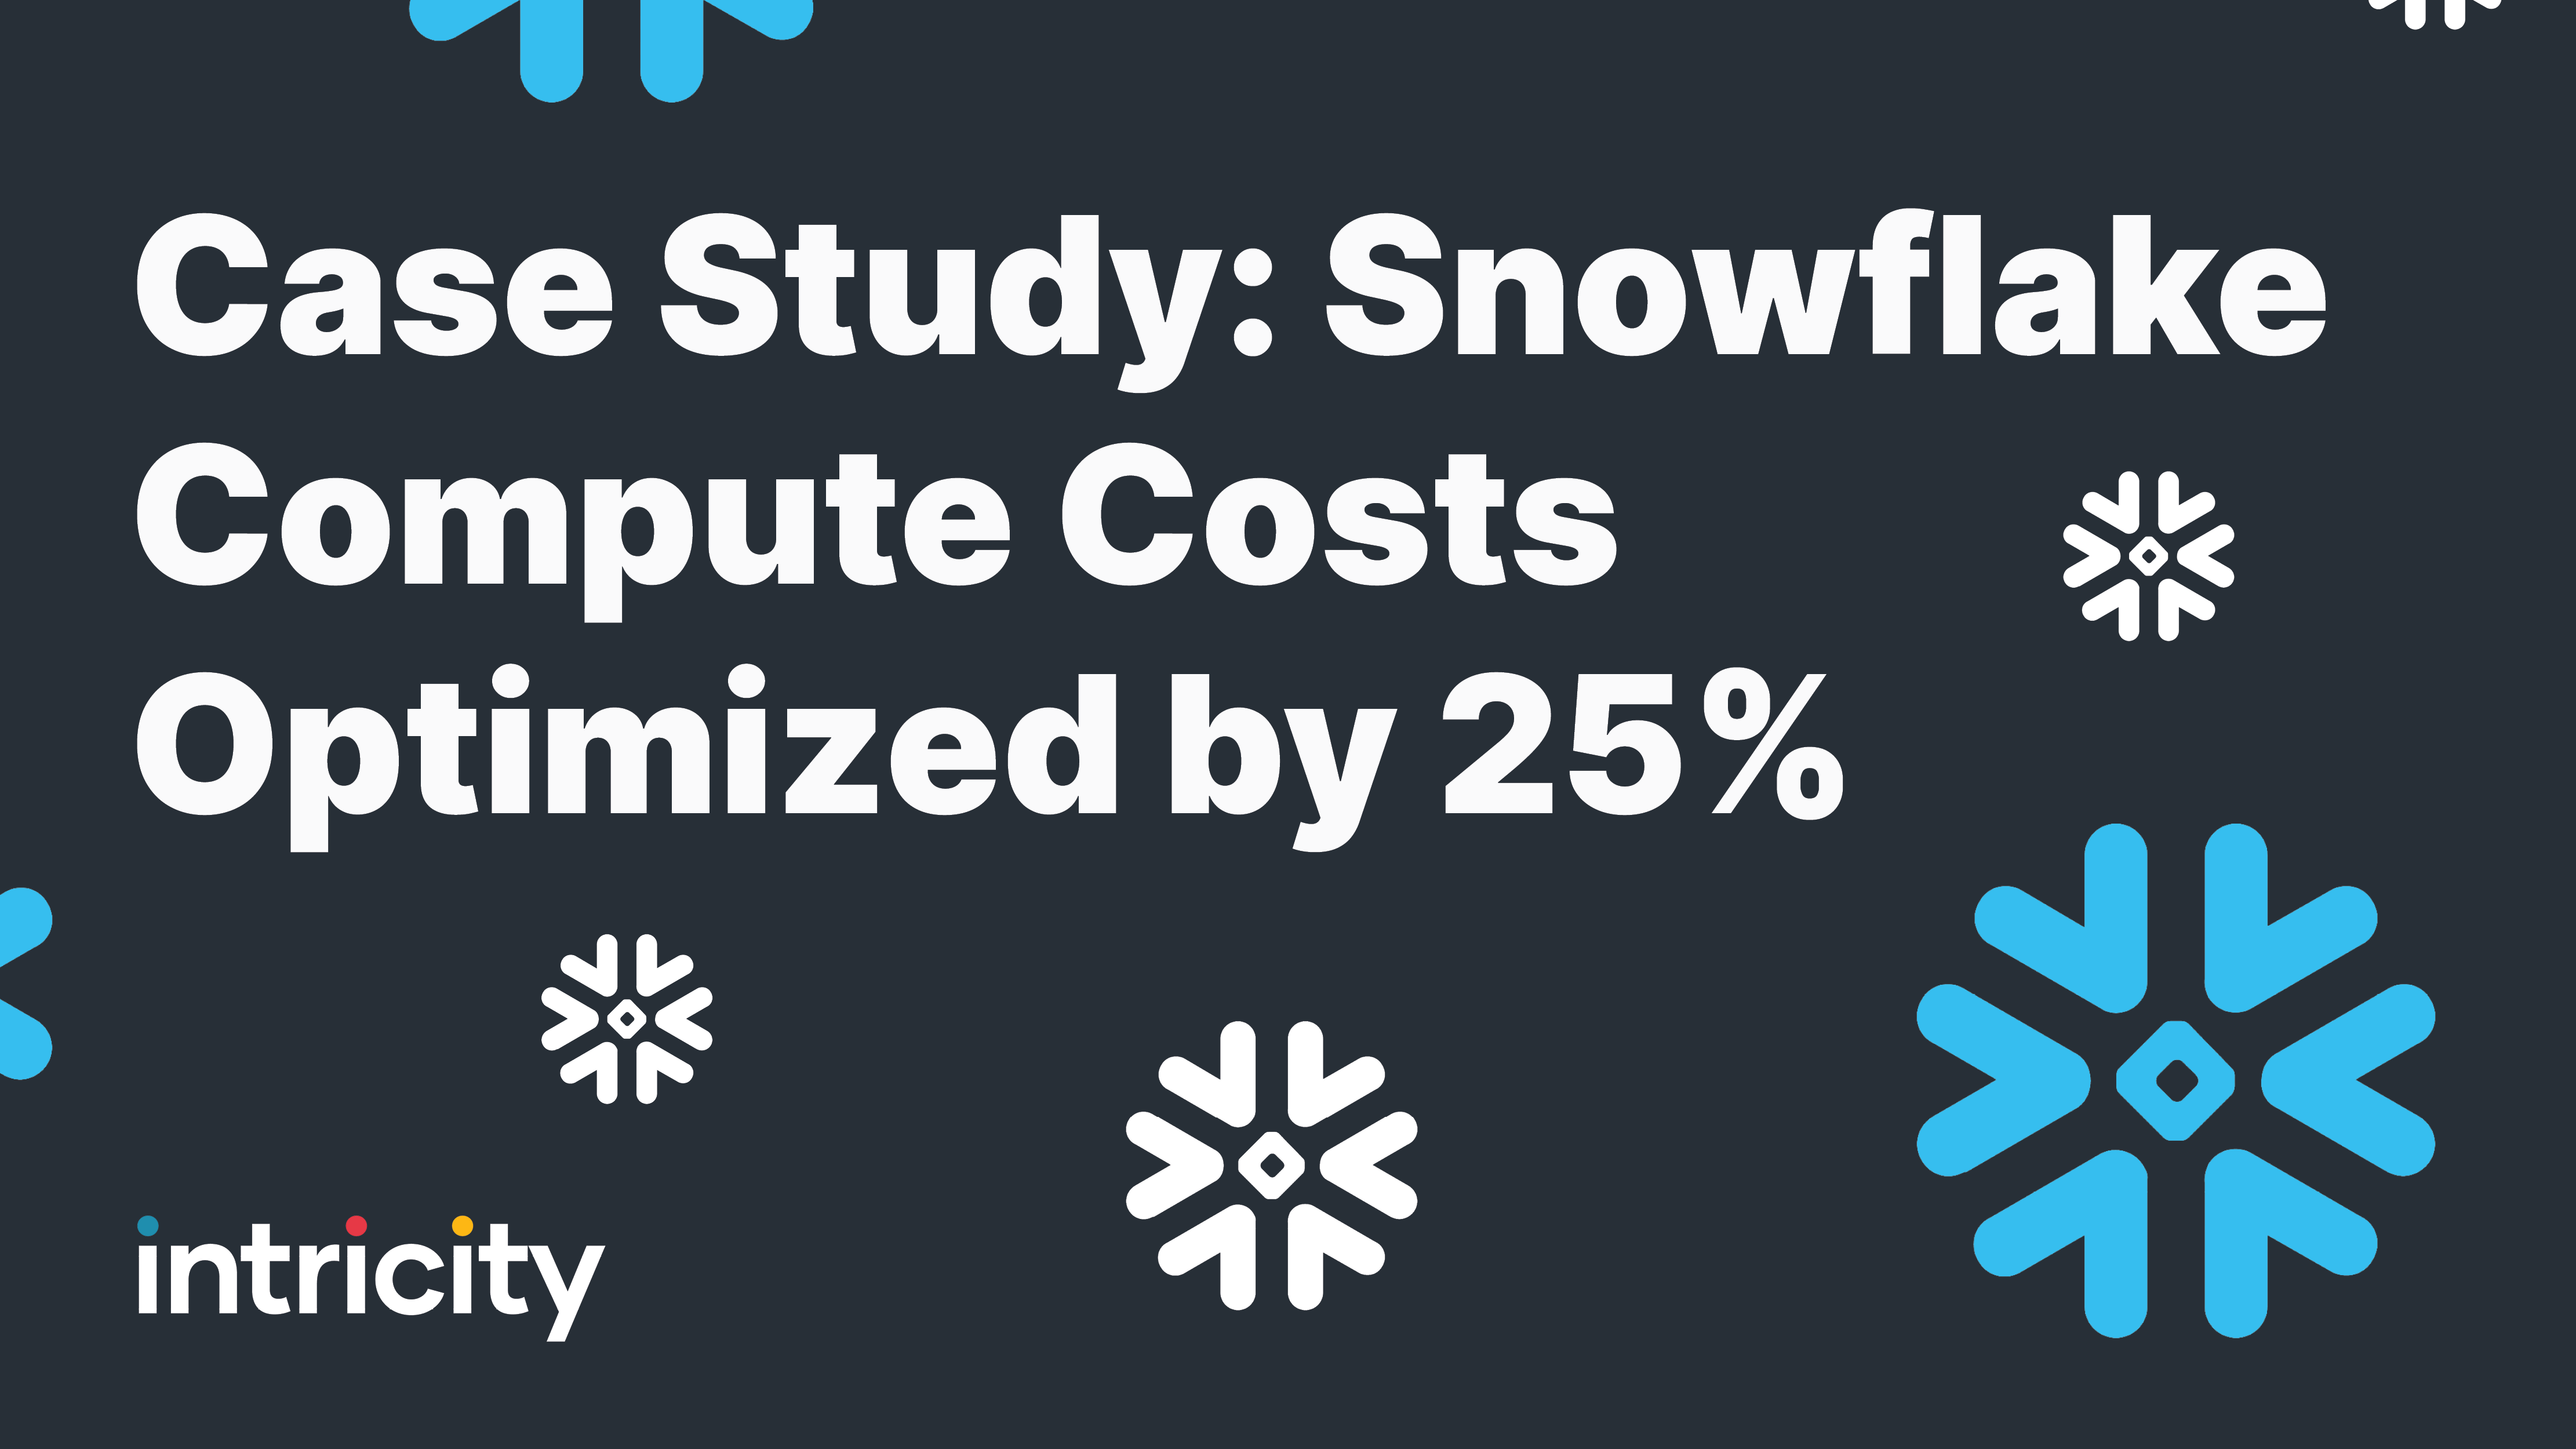 Case Study: Snowflake Compute Costs Optimized by 25%